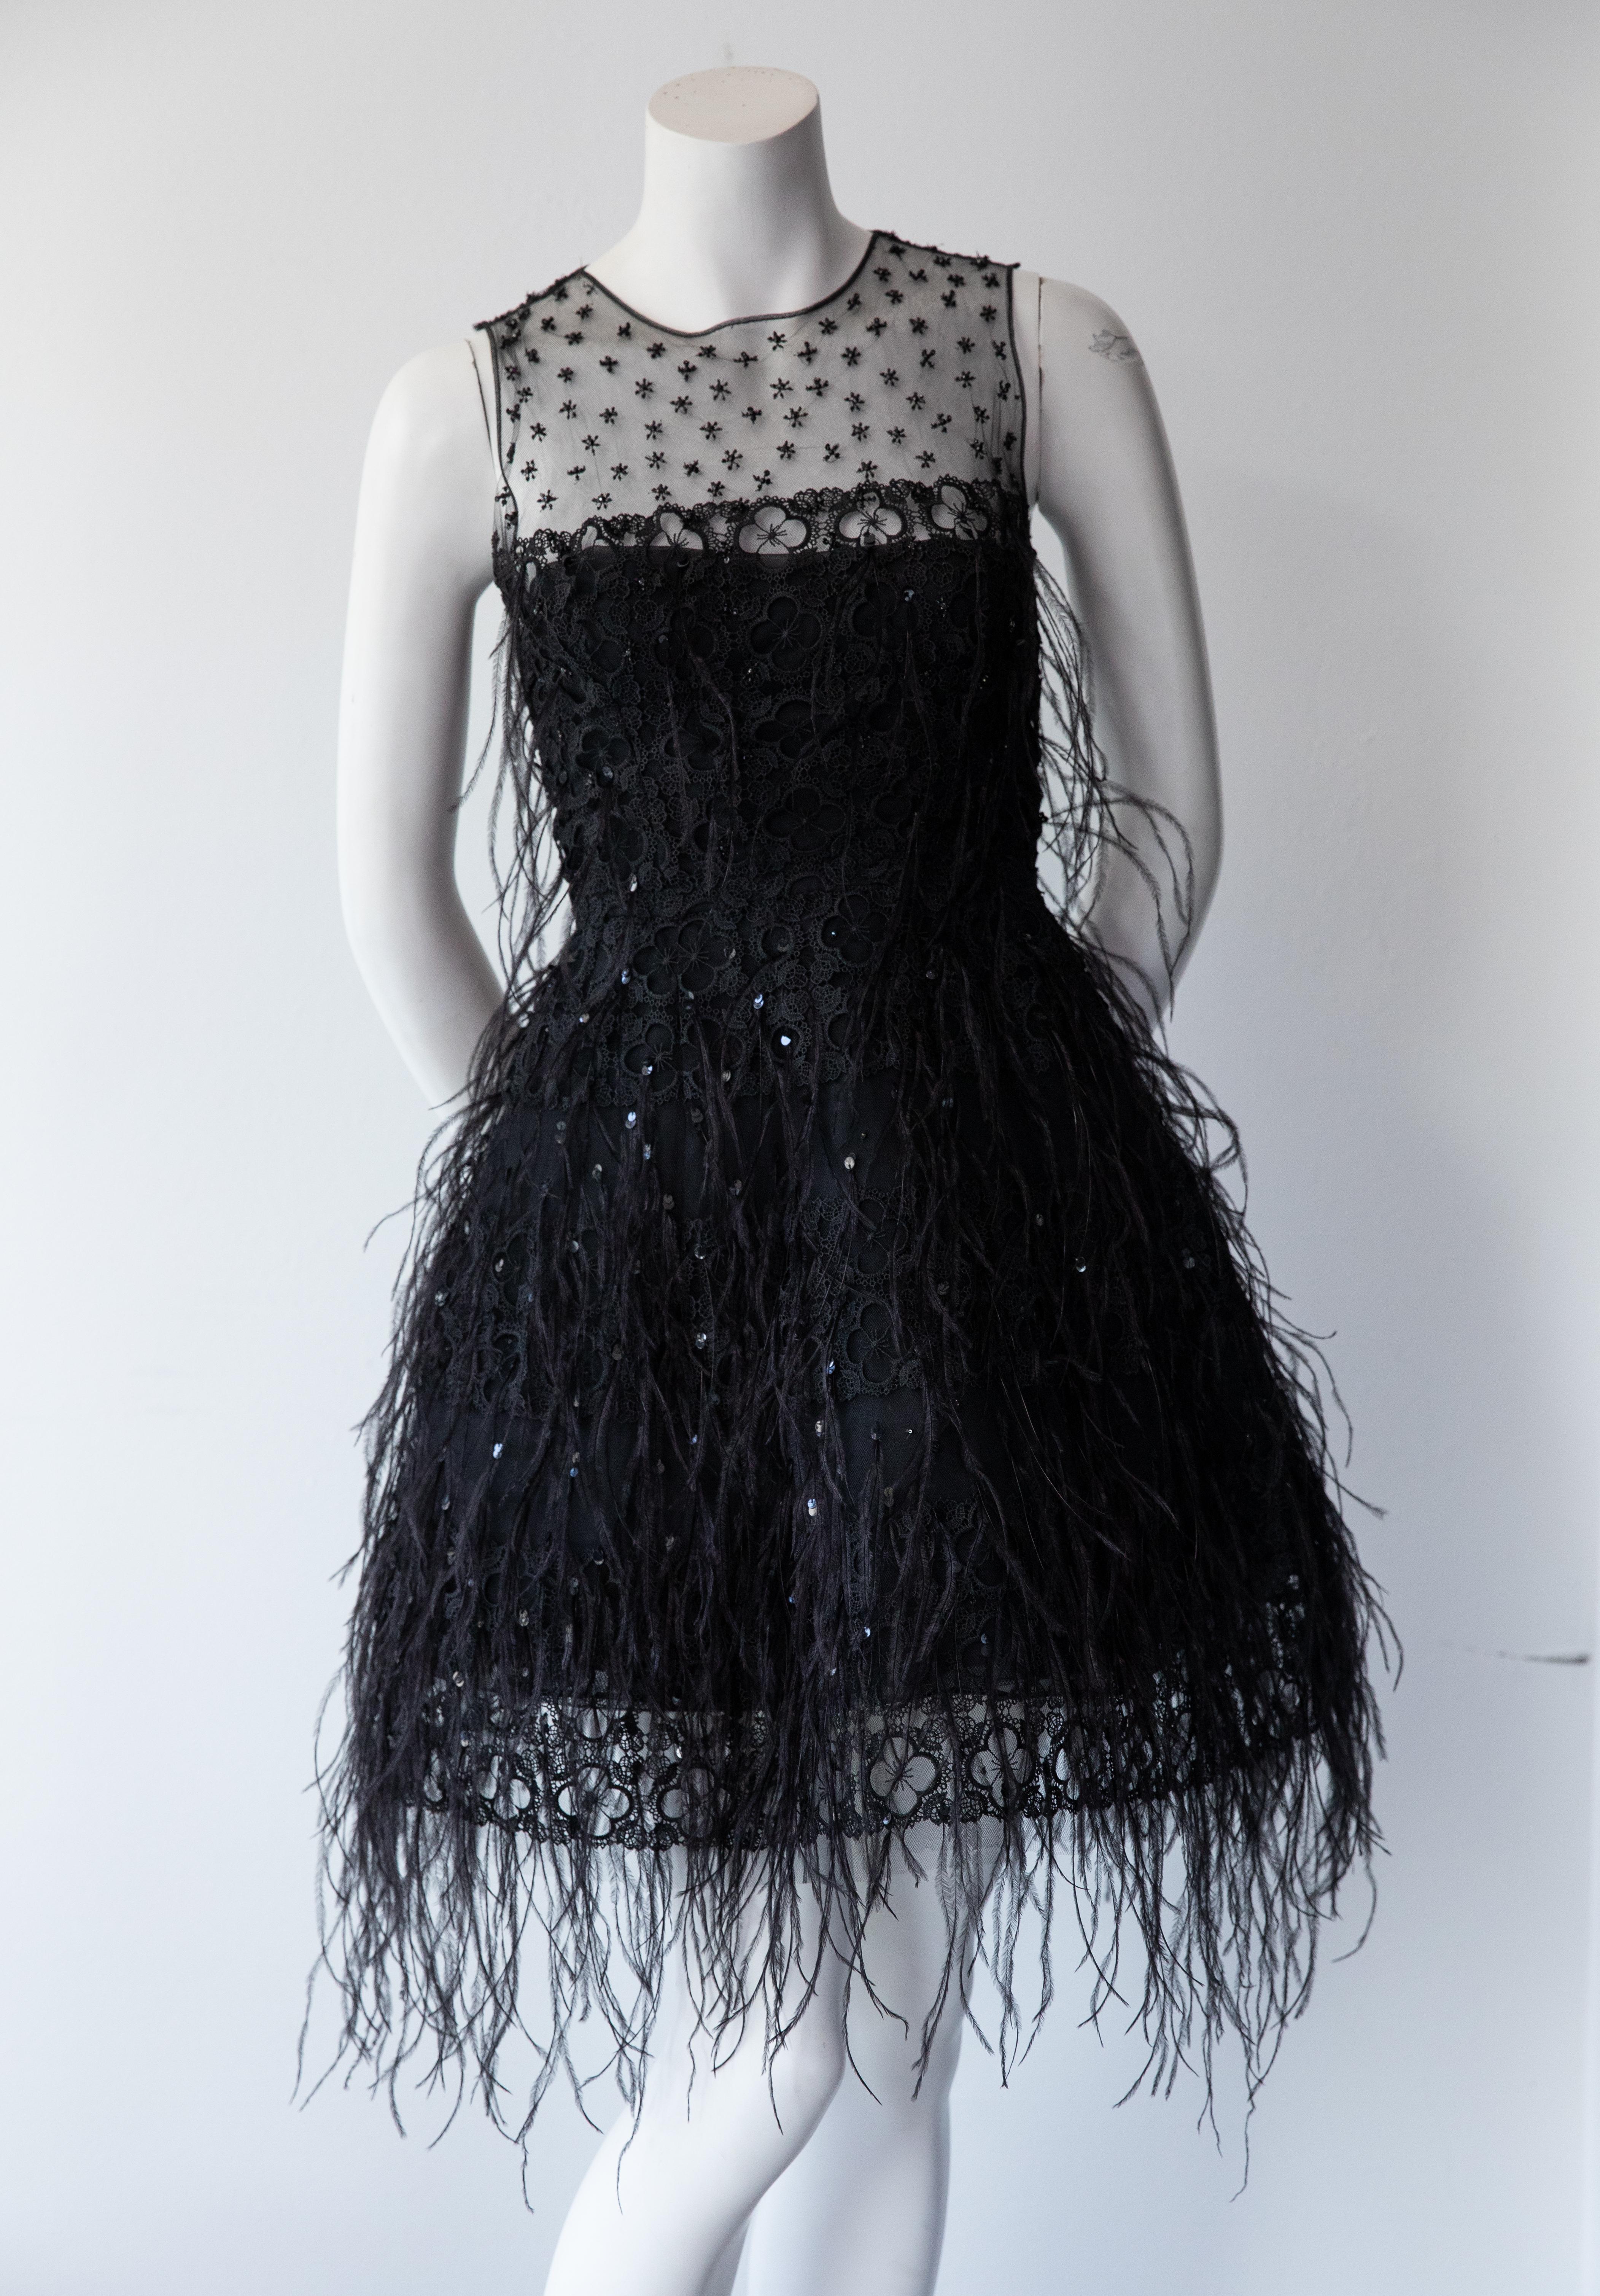 In this structured Oscar De La Renta cocktail dress you will embody the essence of classic, elevated glamour. Black feathers and rhinestones add texture to this sleeveless black dress, while the embroidered sheer mesh yoke adds reveals the slightest